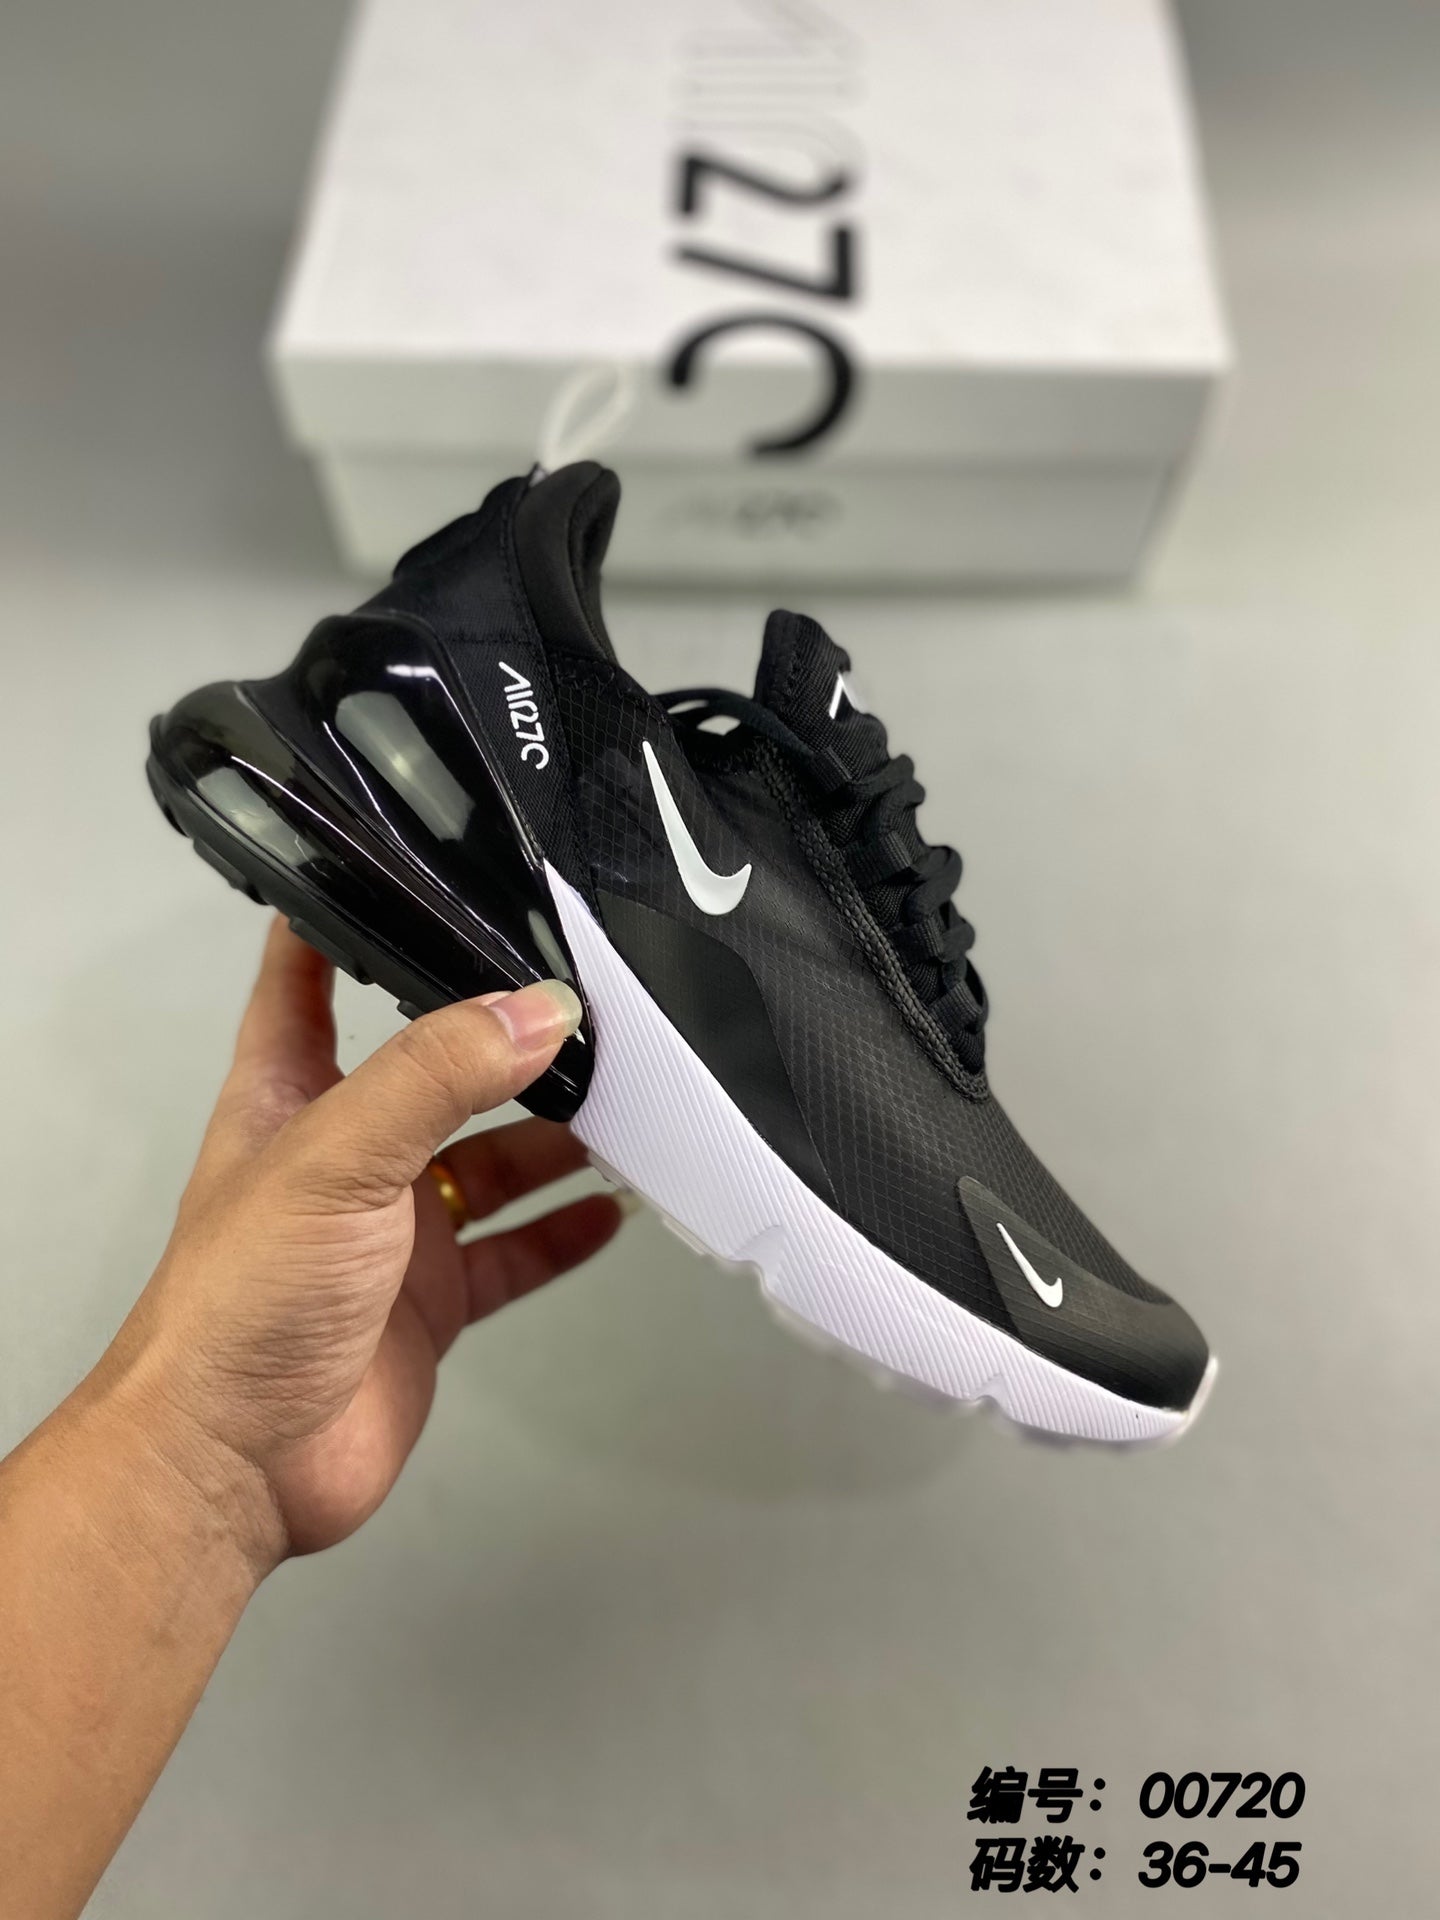 Nike air max 270 react atmospheric pad Caramel breathable sneakers cushioned running shoes